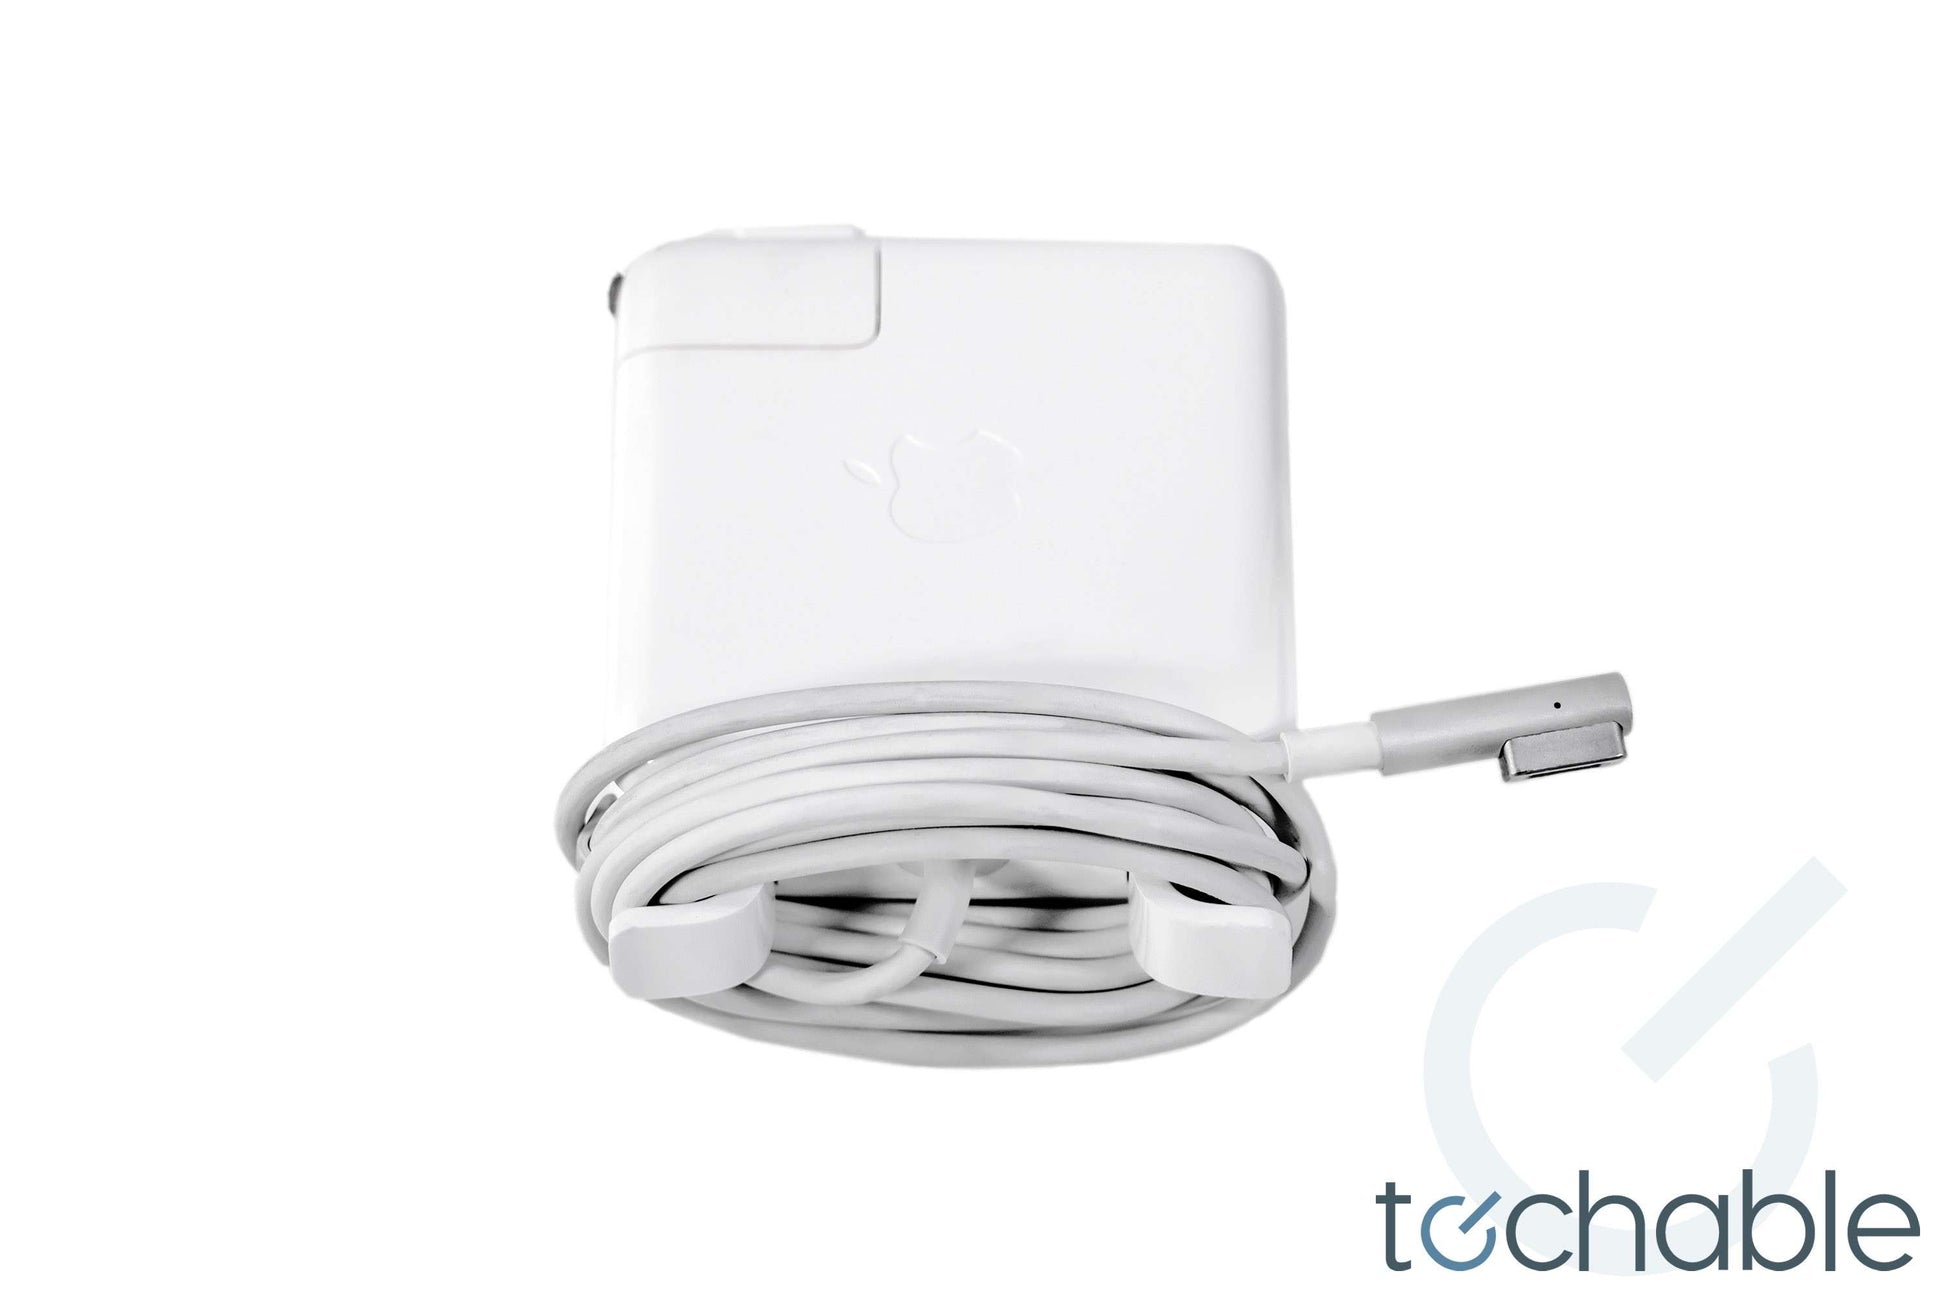 Apple MagSafe 1 Charger 85w for Macbook Pro w/ 6 foot extension cable